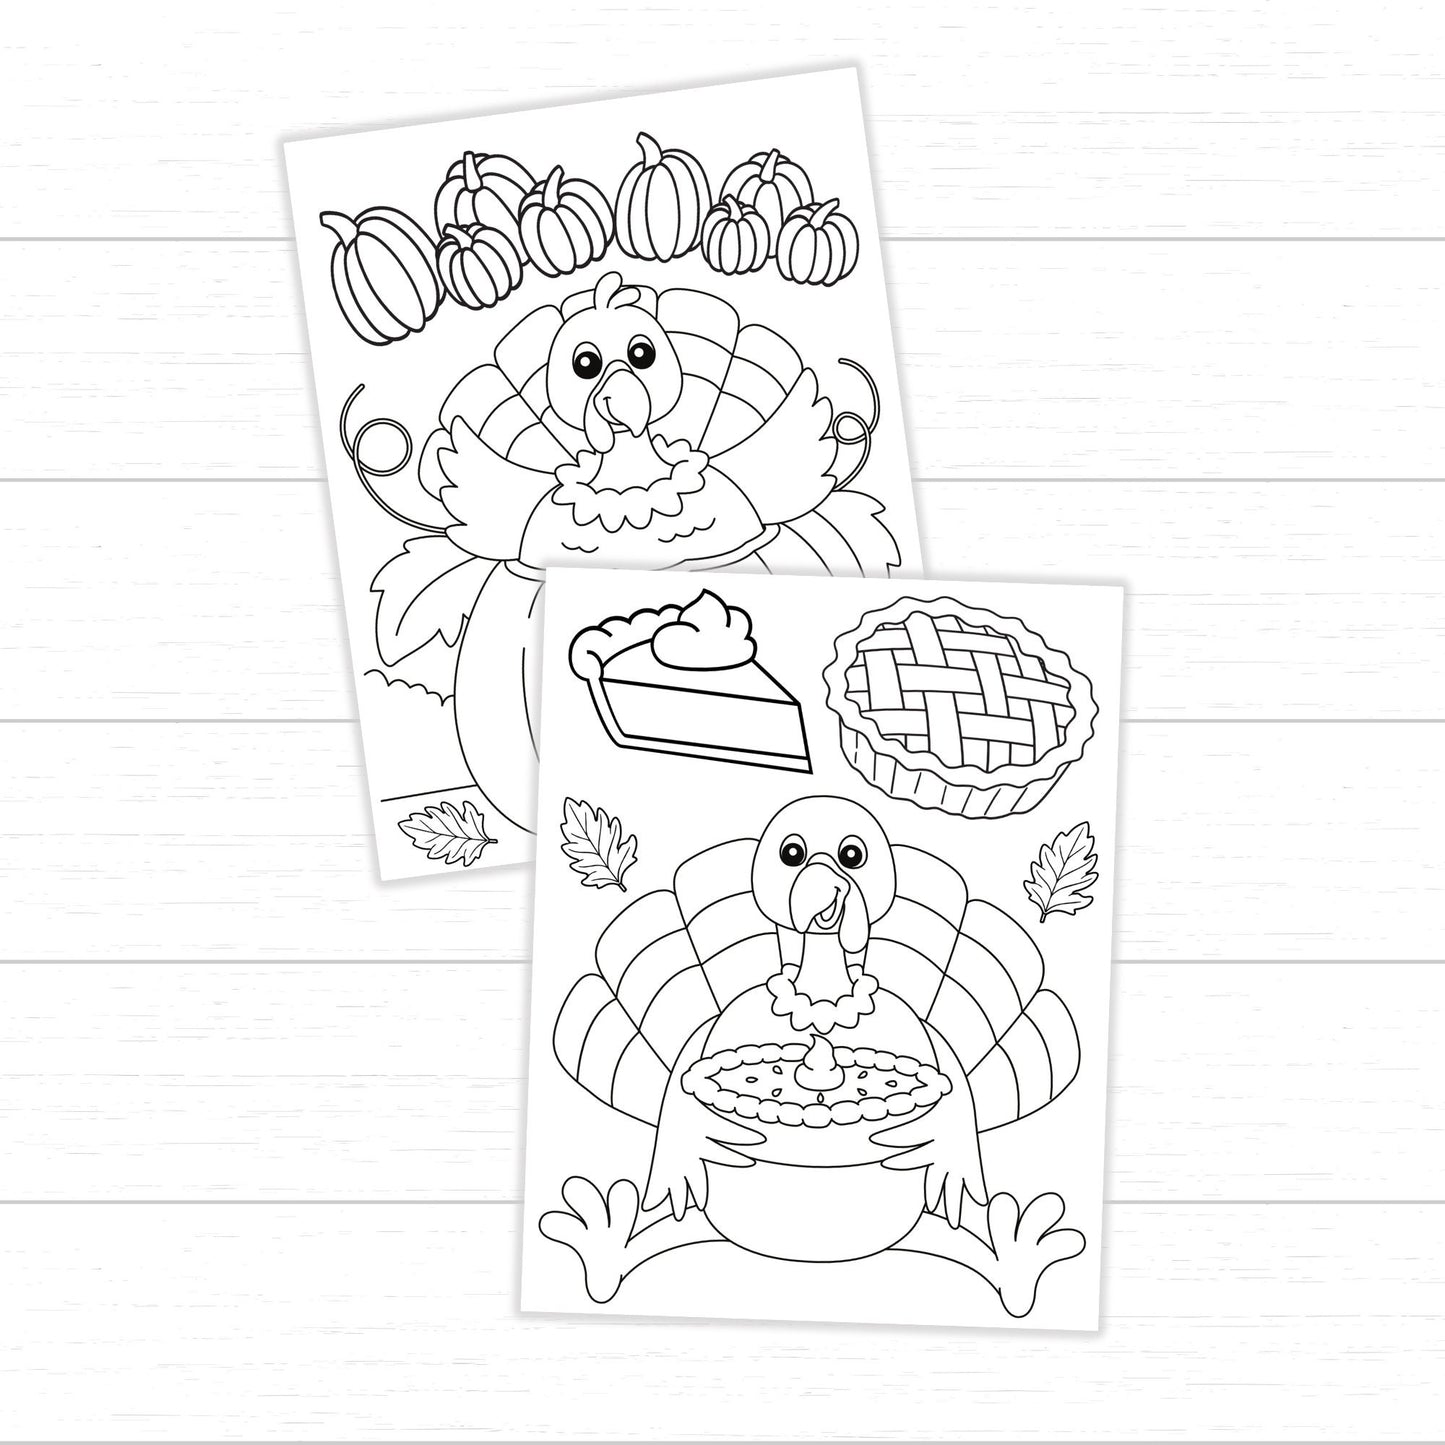 Thanksgiving Turkey Coloring Pages, Printable Turkey Coloring Pages, Turkey Printables, Thanksgiving Coloring Pages, Fall Coloring Pages